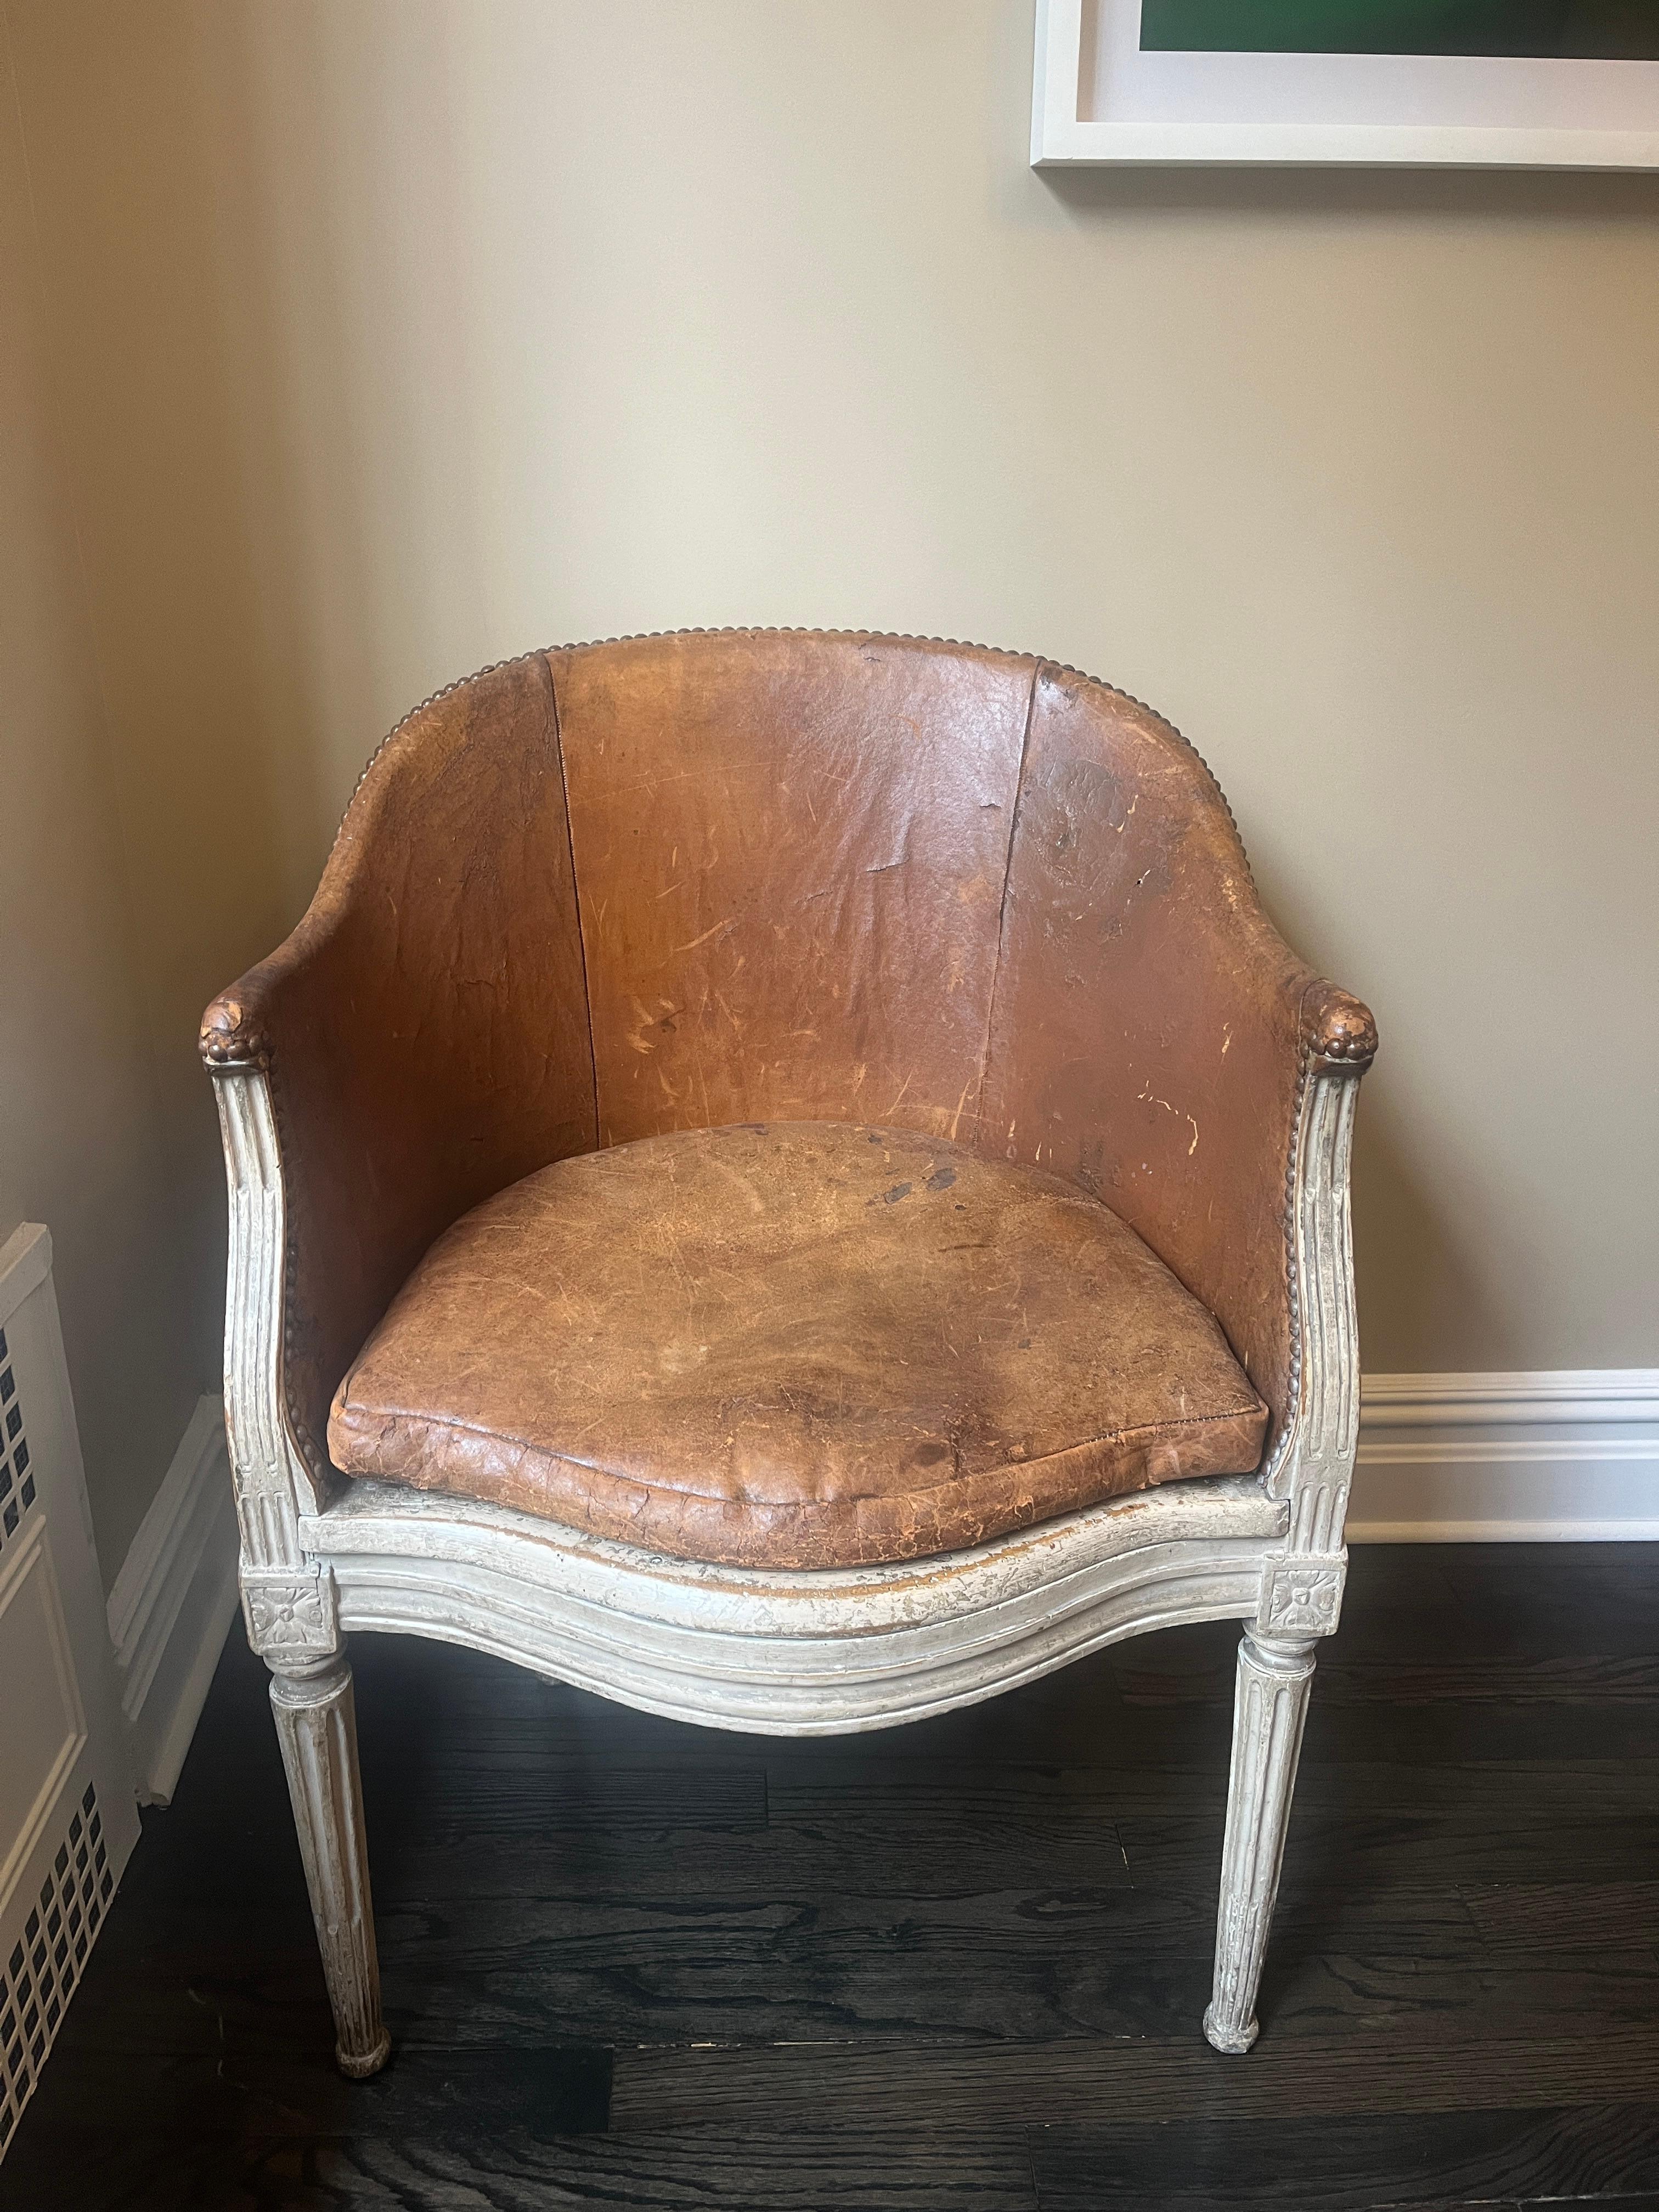 18th Century French Louis XVI Bergere chair, with brown leather seat and back. Painted wood frame, carved fluted tapered legs, brass nail head detail, and cane backing in good condition.  


Addl. dimensions: 27